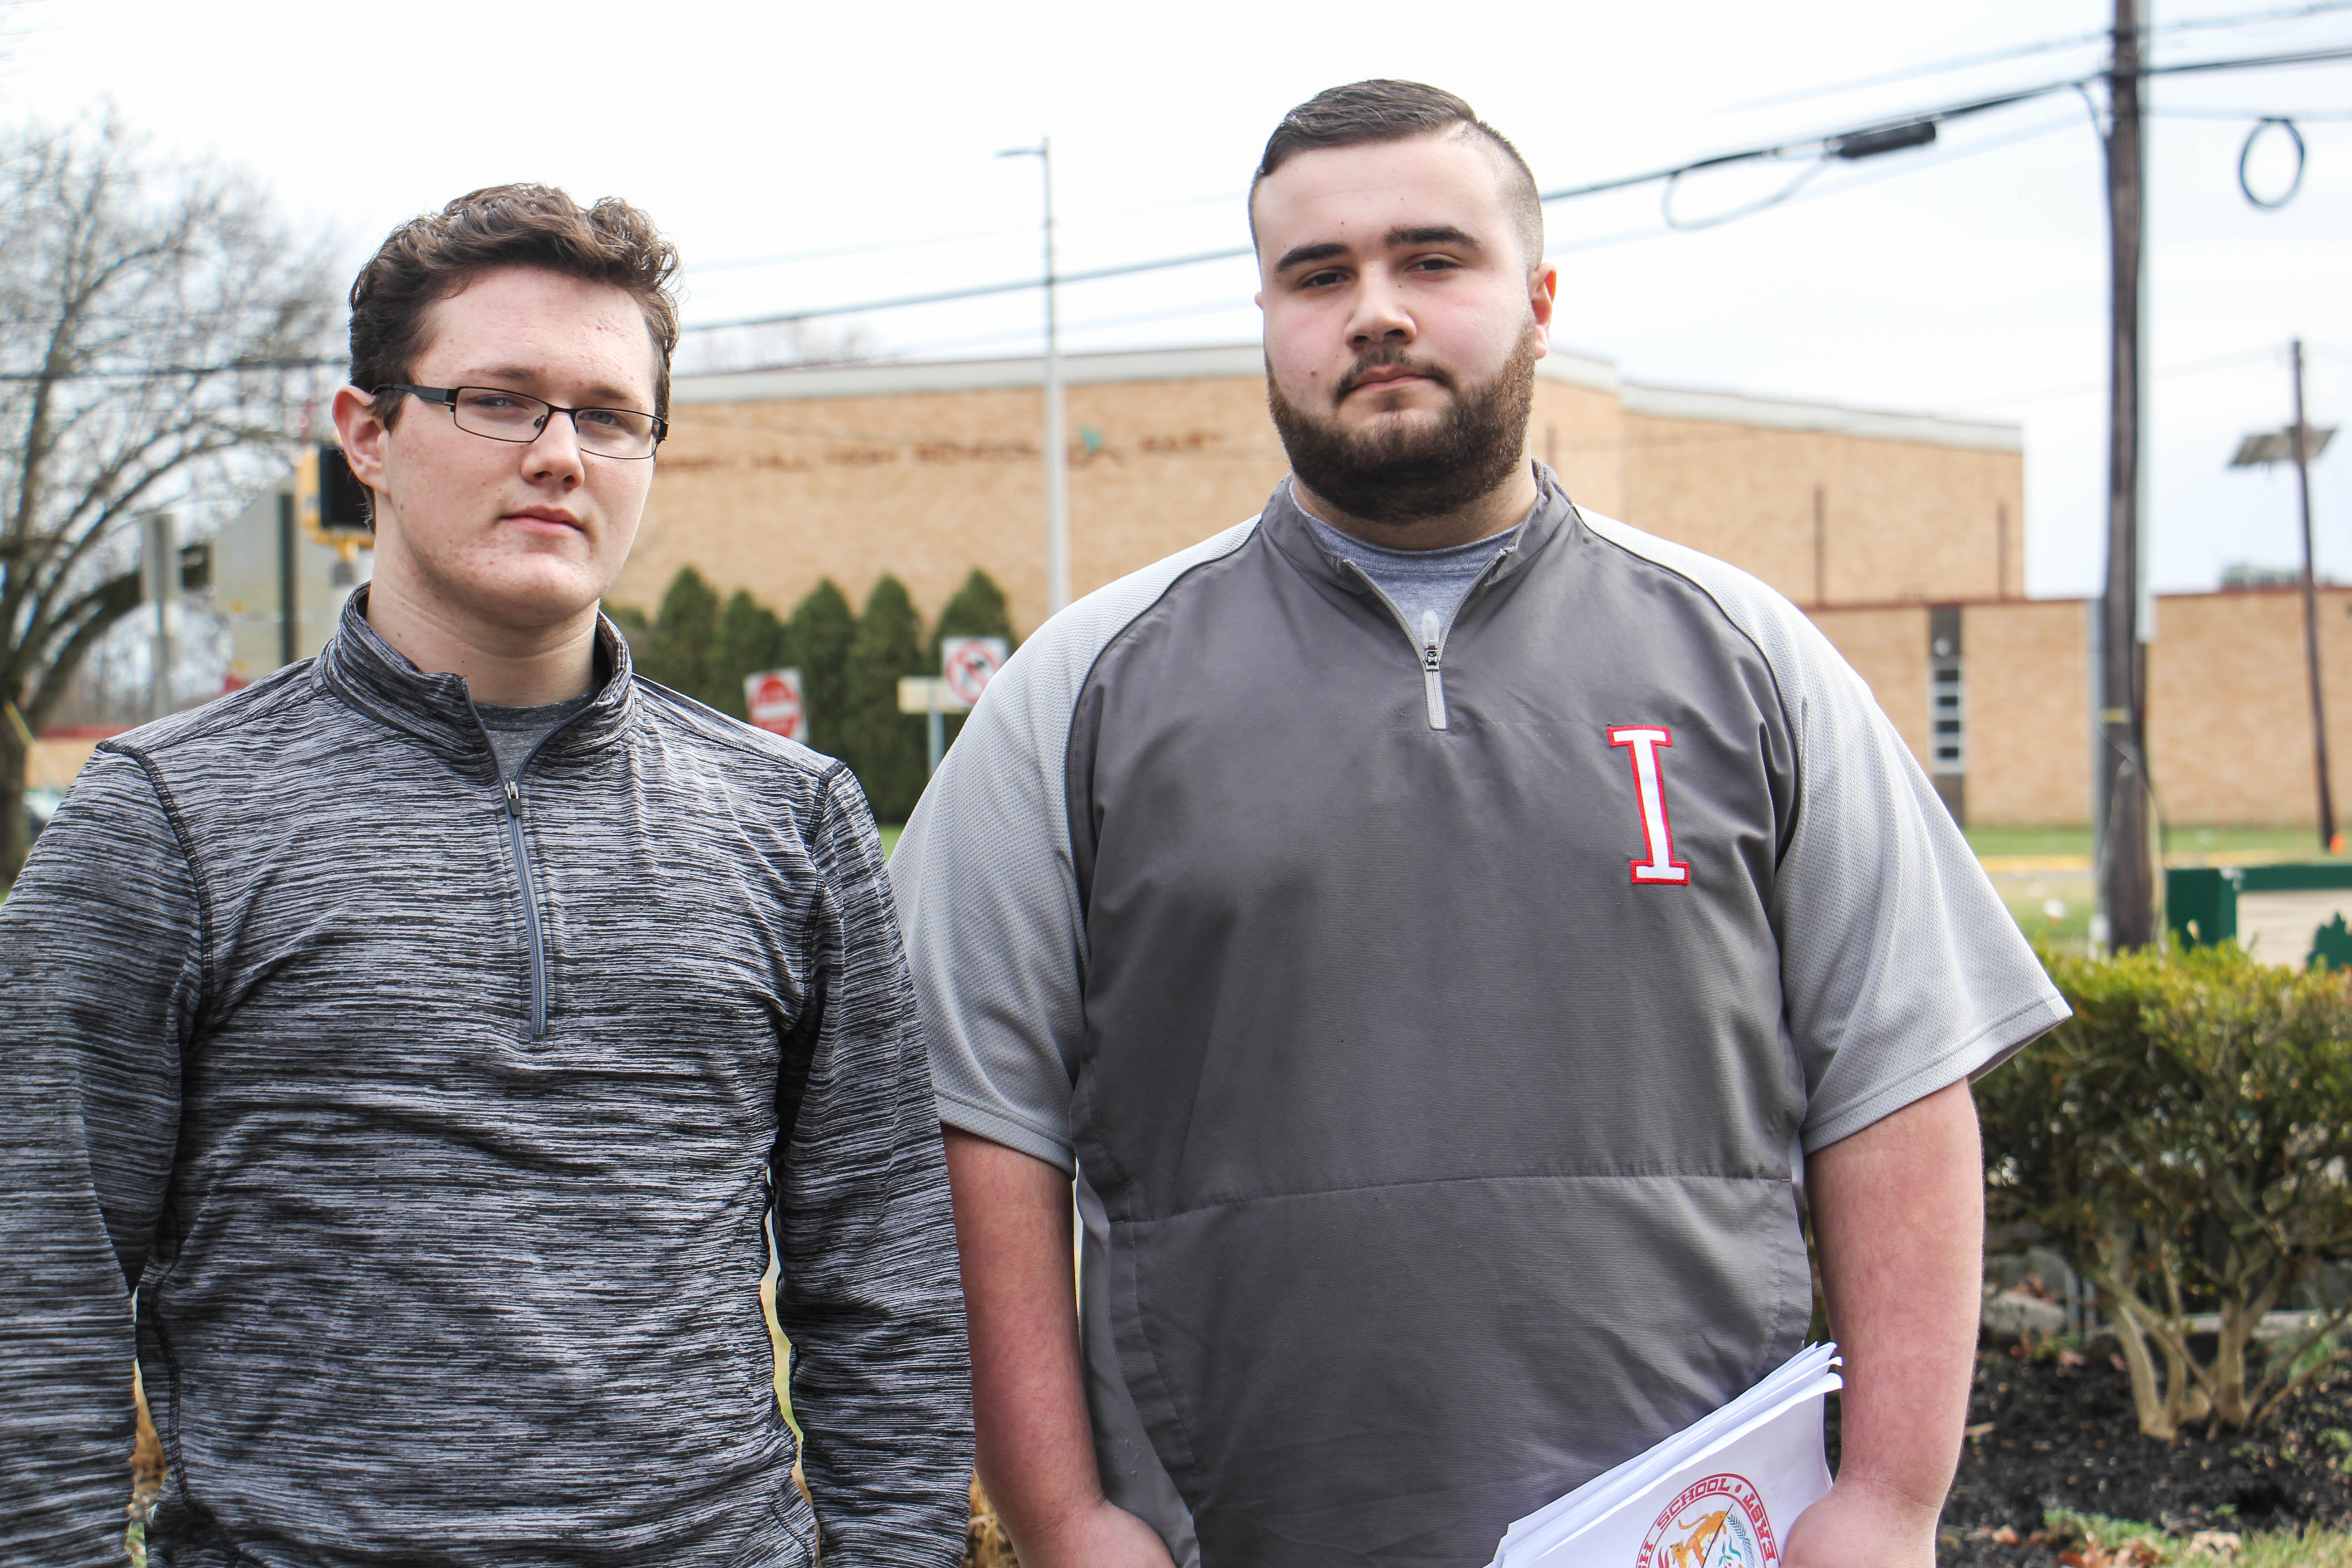 Cherry Hill East seniors Gabriel Ritter (left) and Justin Prechodko collected more than 500 signatures on a petition asking that teacher Timothy Locke be reinstated. 